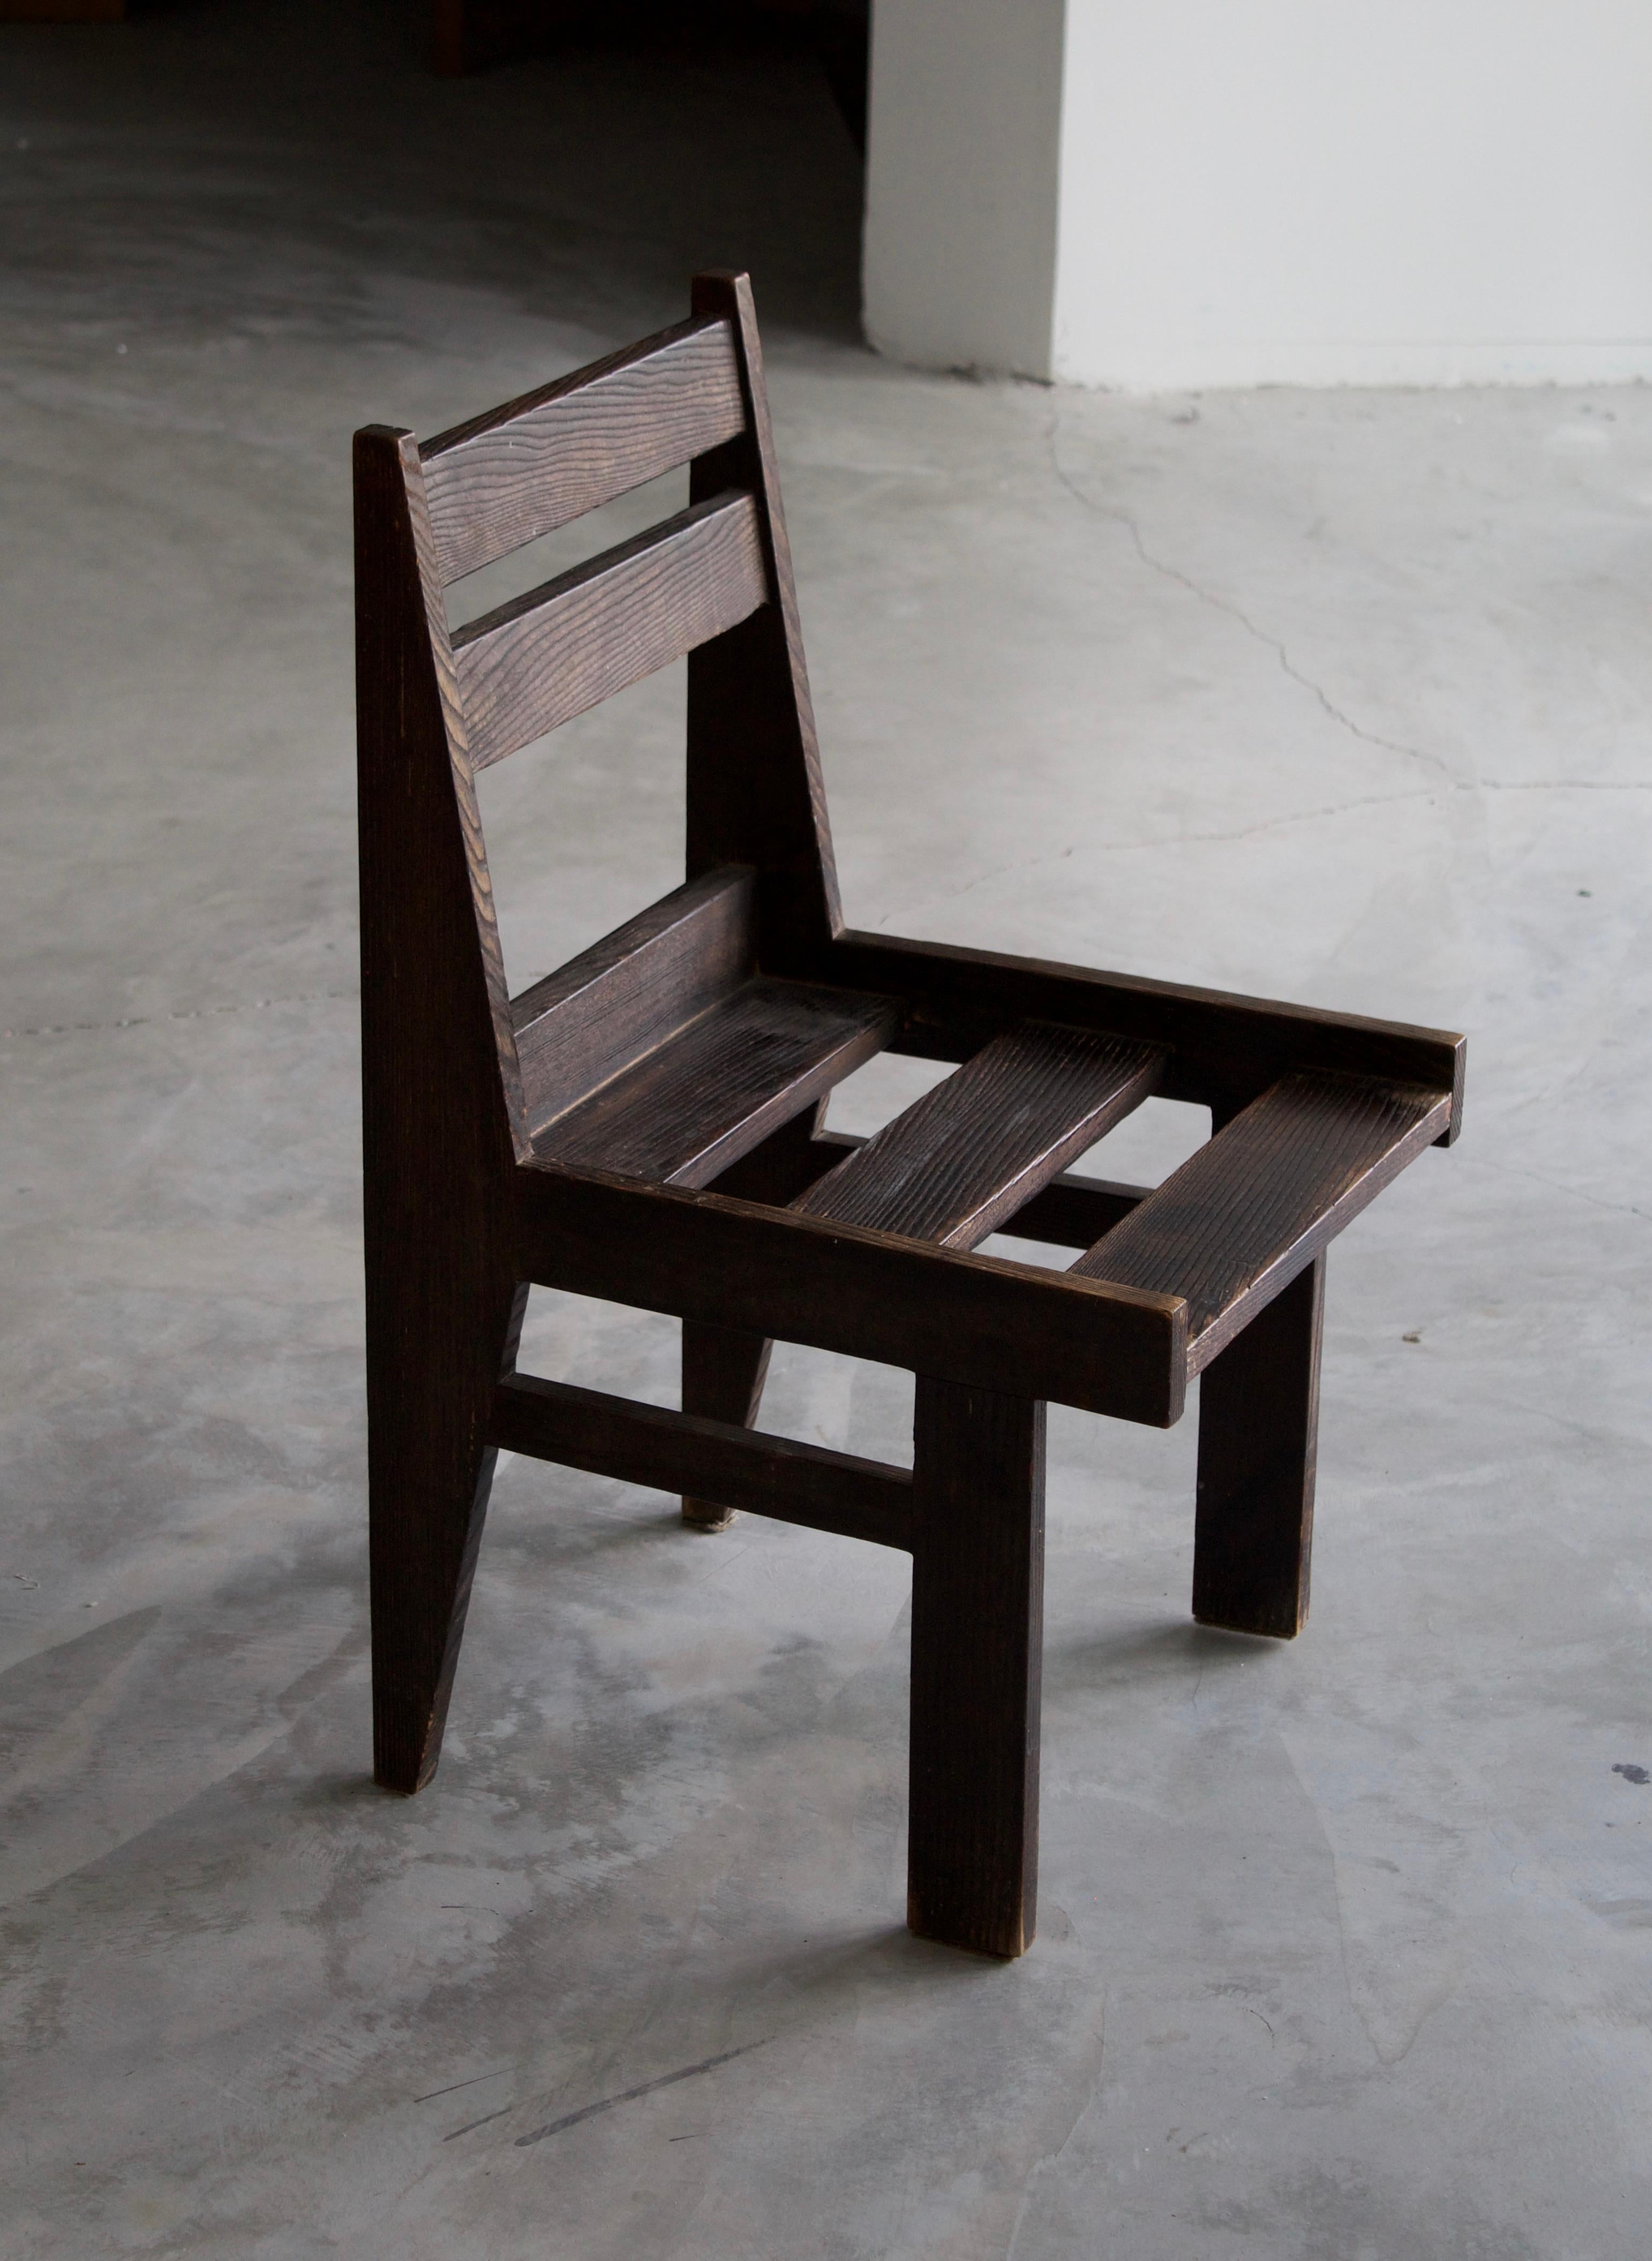 A side chair. In finely carved and joined solid oak. Designed and produced in the Netherlands, c. 1940s-1950s.

Other designers of the period include Jean Prouvé, Pierre Jeanneret, Pierre Chapo, and Gerrit Rietveld.